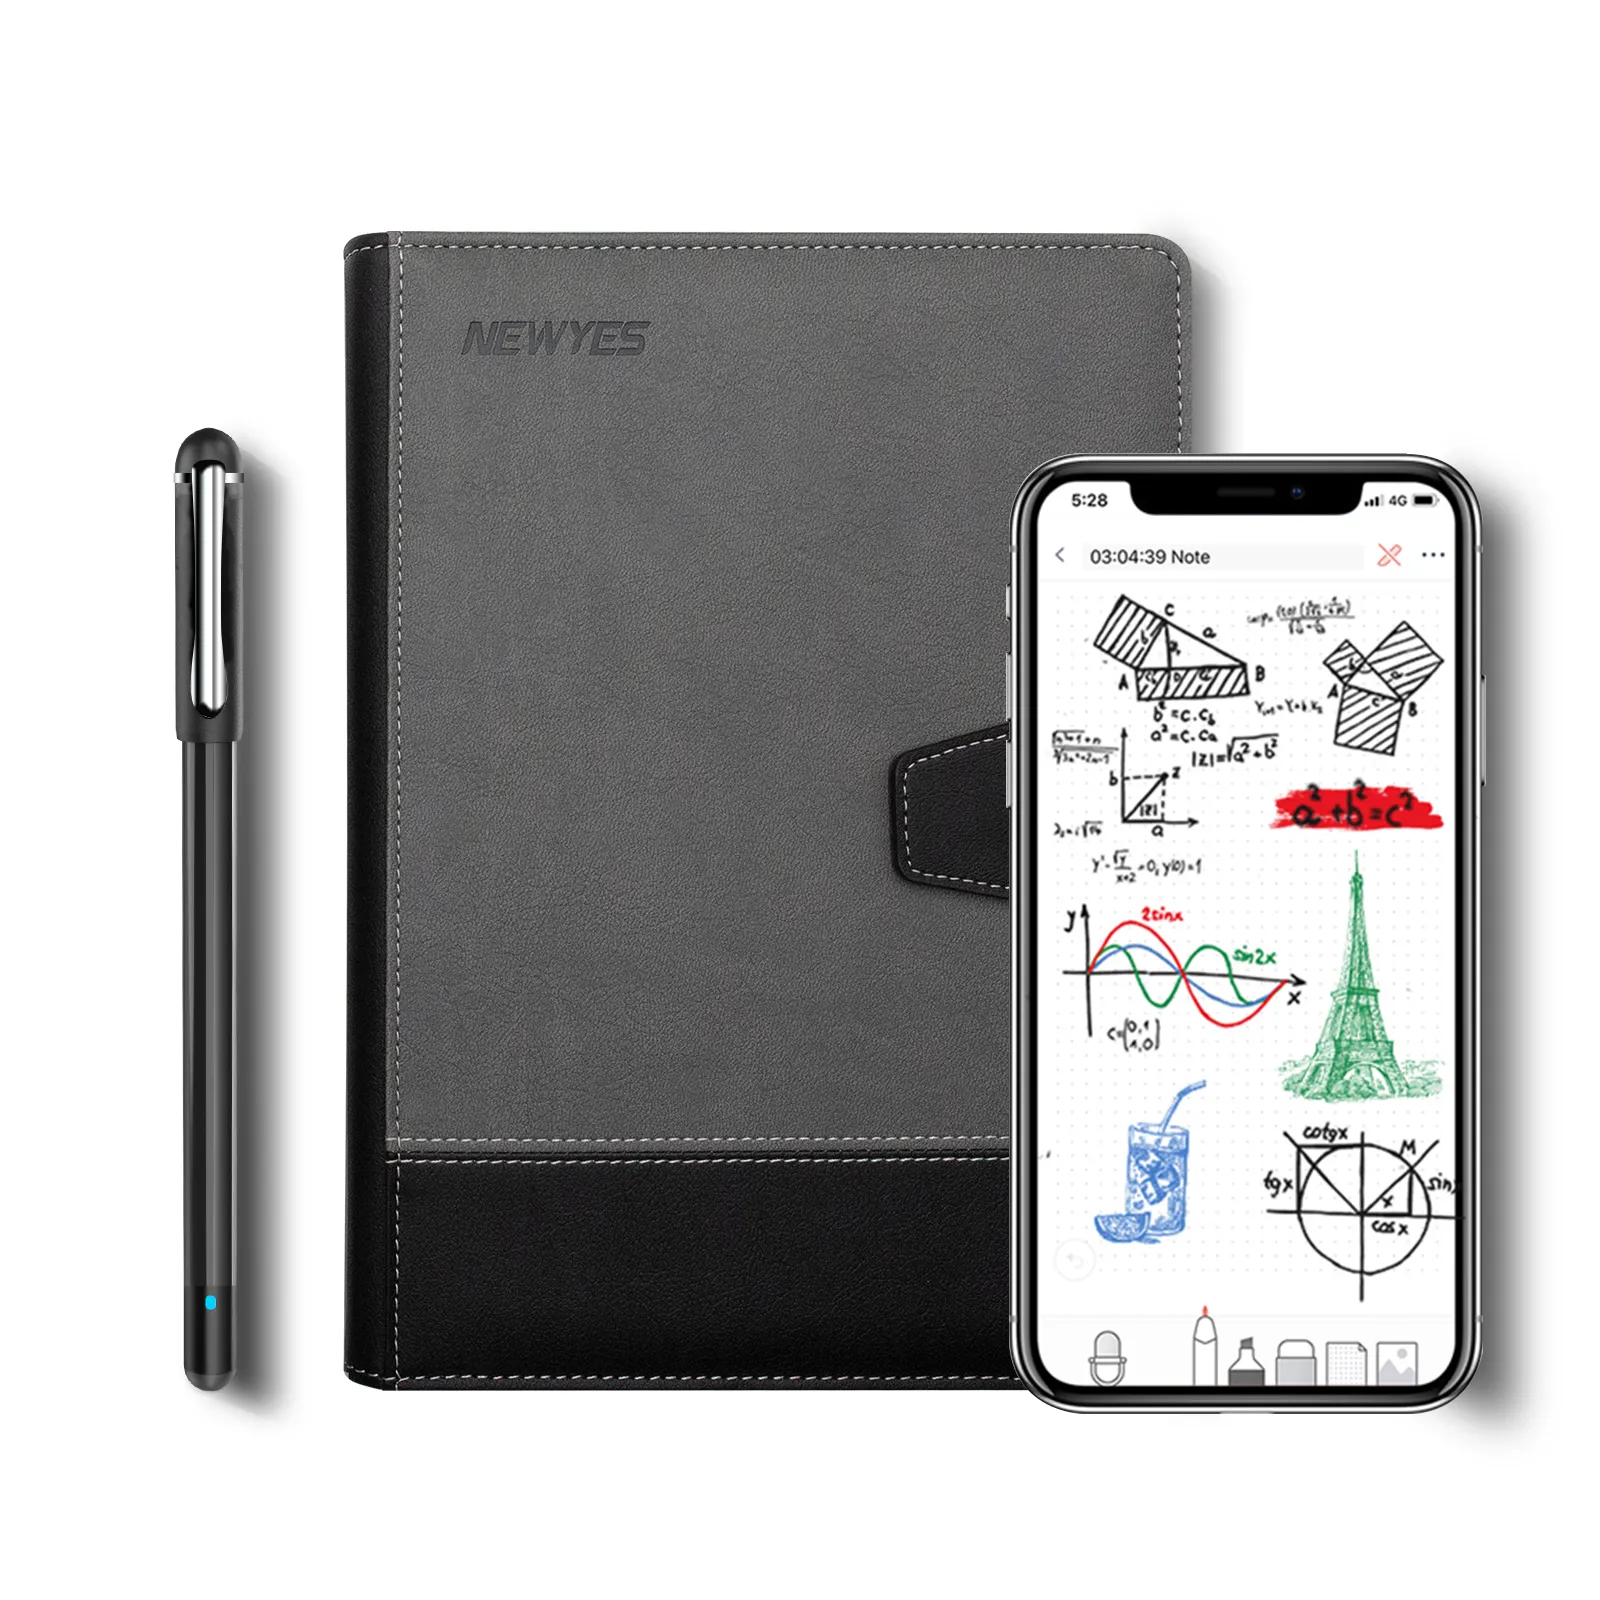 Pen And Notebook Newyes Digital Note Book Smart Writing Set Handwriting Recognition Smart Pen And Notebook With App